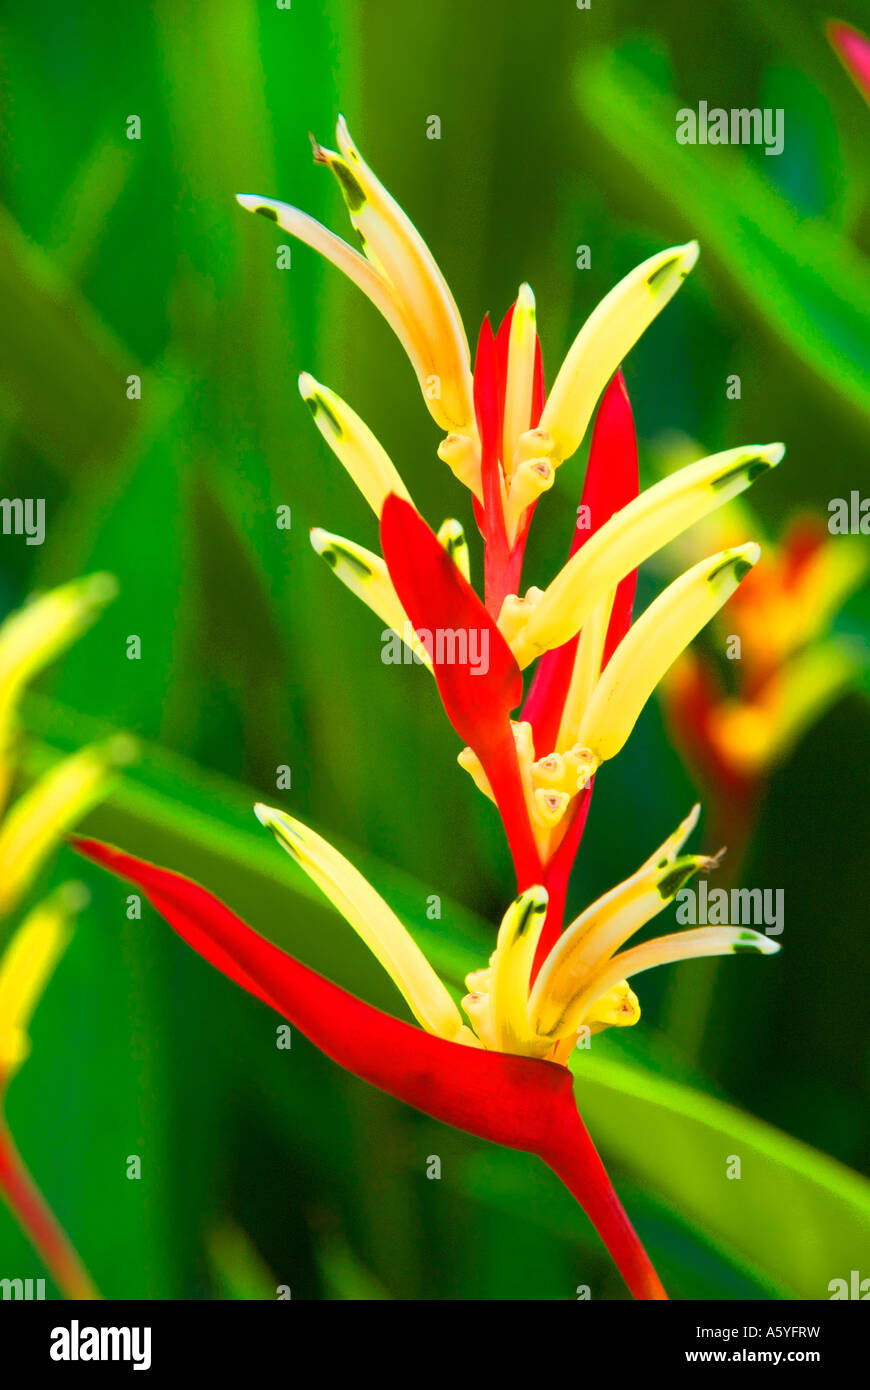 The South American red Heliconia angusta often called the Christmas heliconia because it flowers around Christmas time. Stock Photo